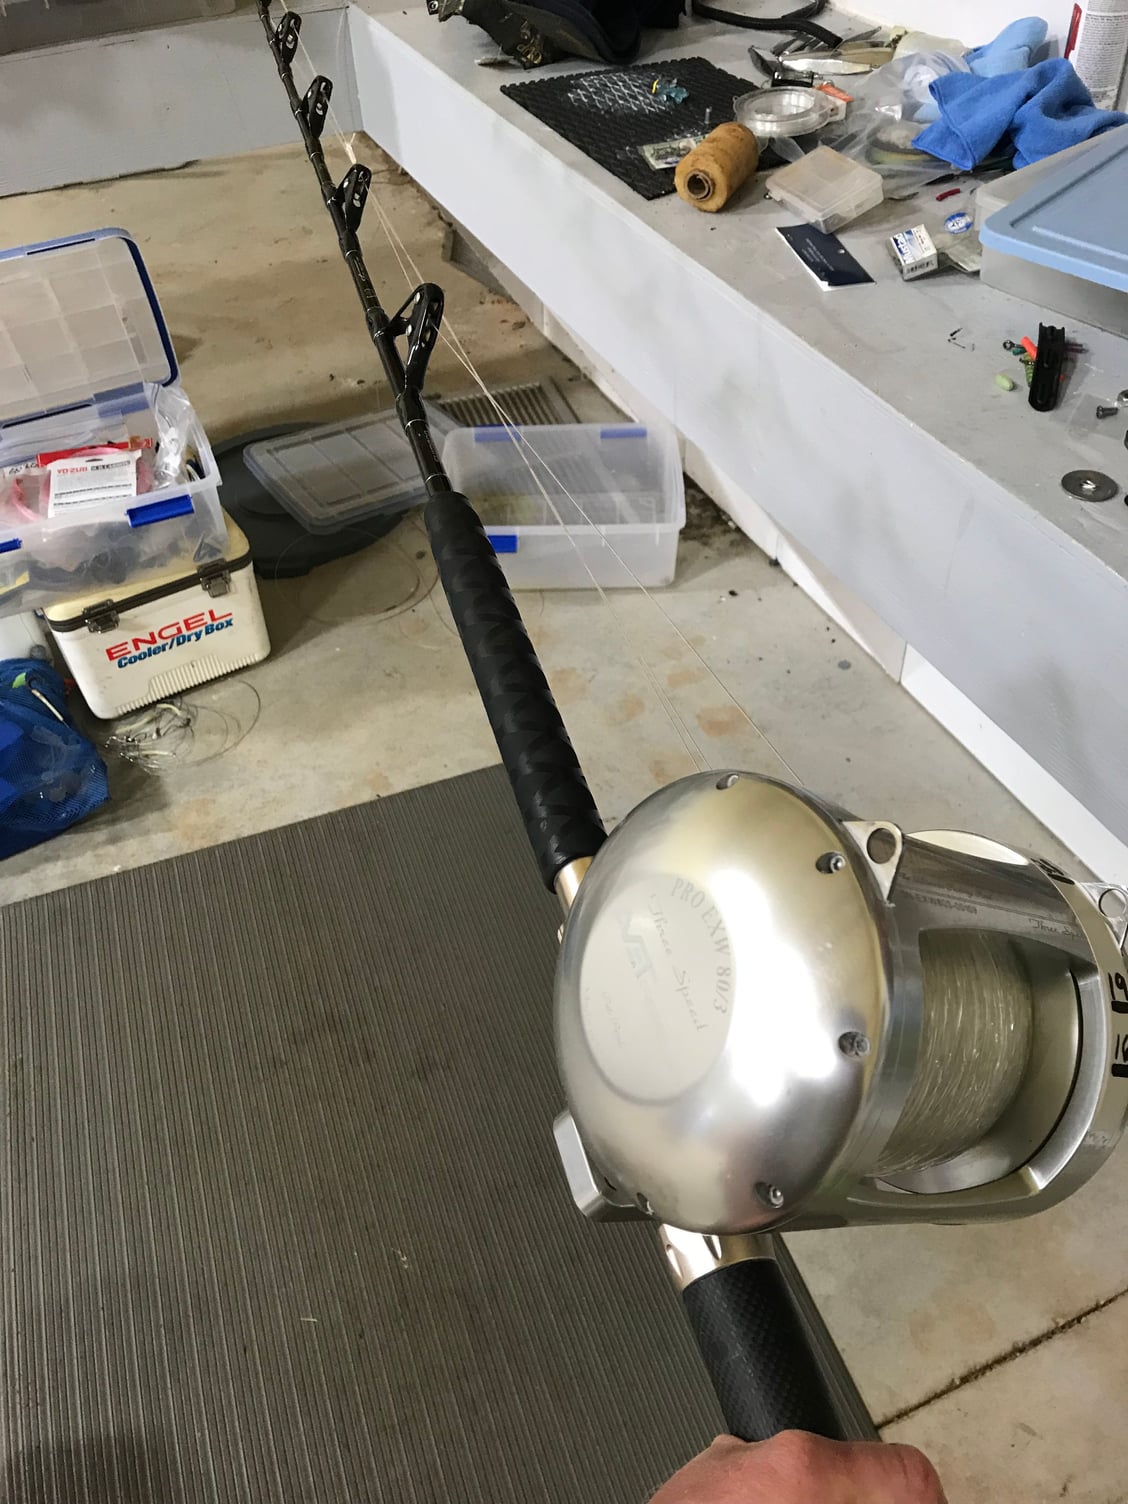 2 Avet pro exw 80/3 for sale - The Hull Truth - Boating and Fishing Forum